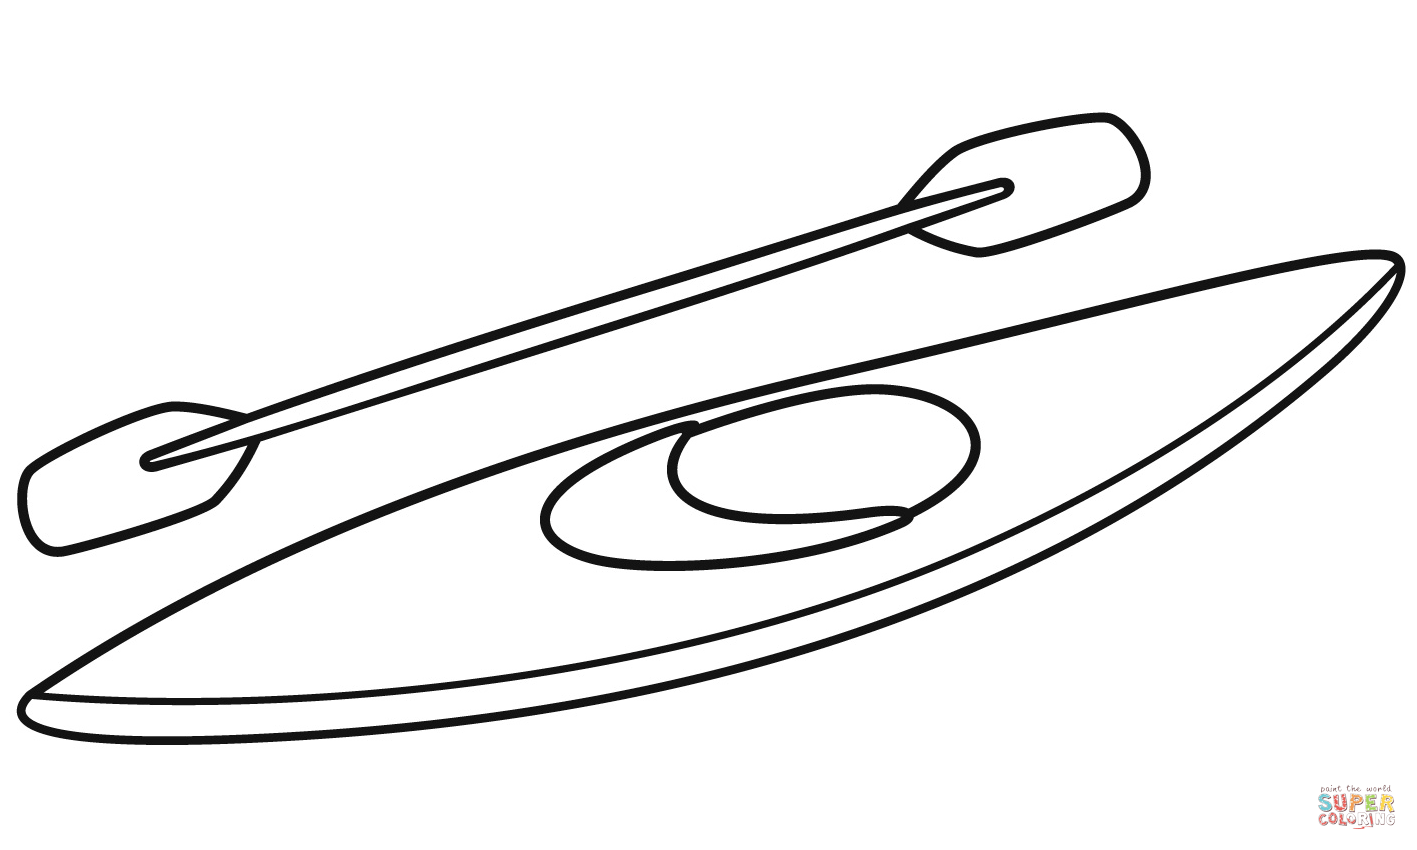 Kayak coloring page free printable coloring pages